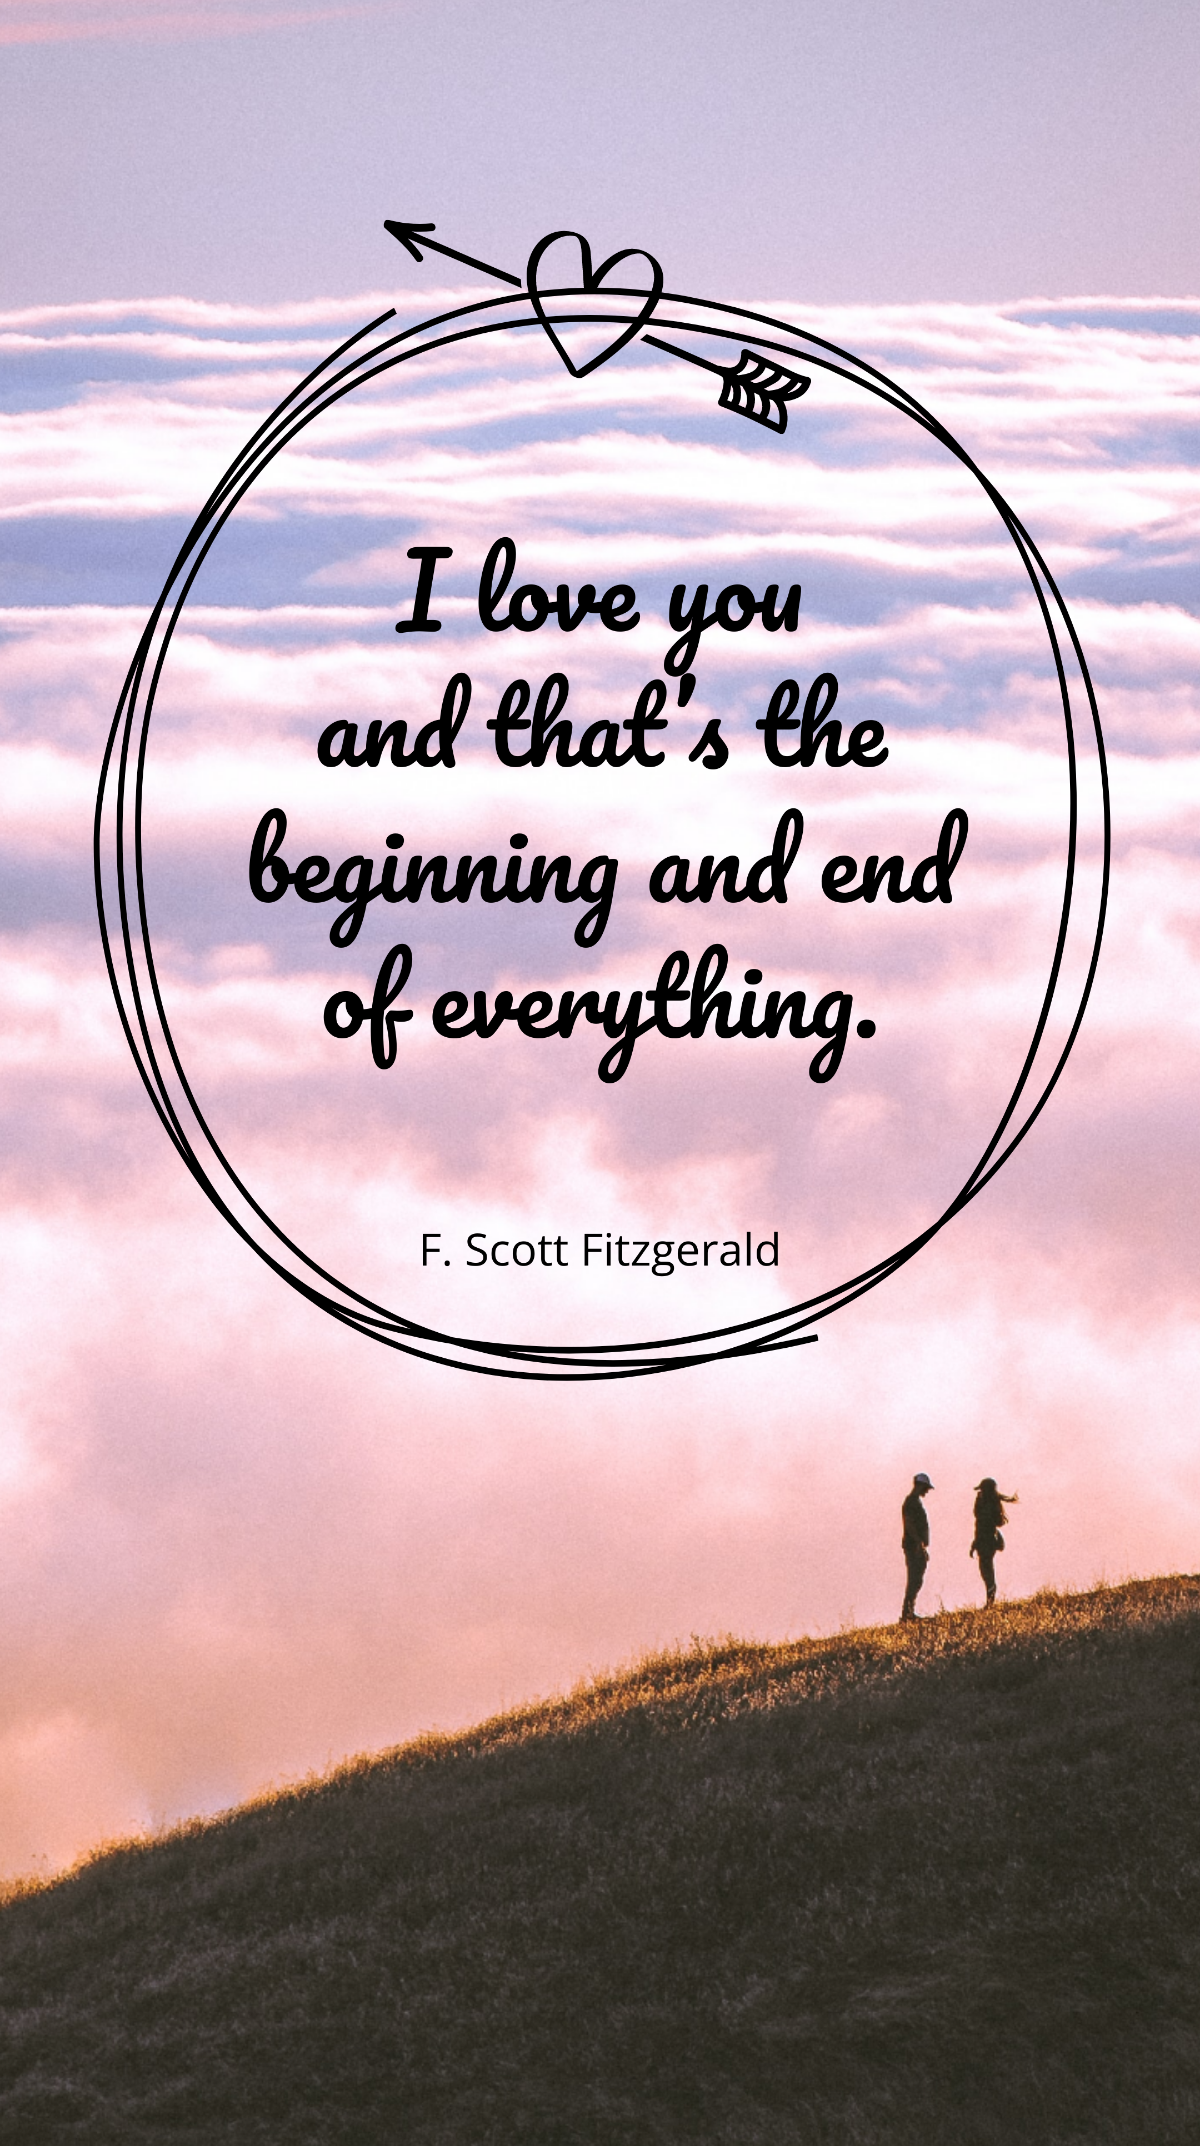 F. Scott Fitzgerald - “I love you and that’s the beginning and end of everything.” Template